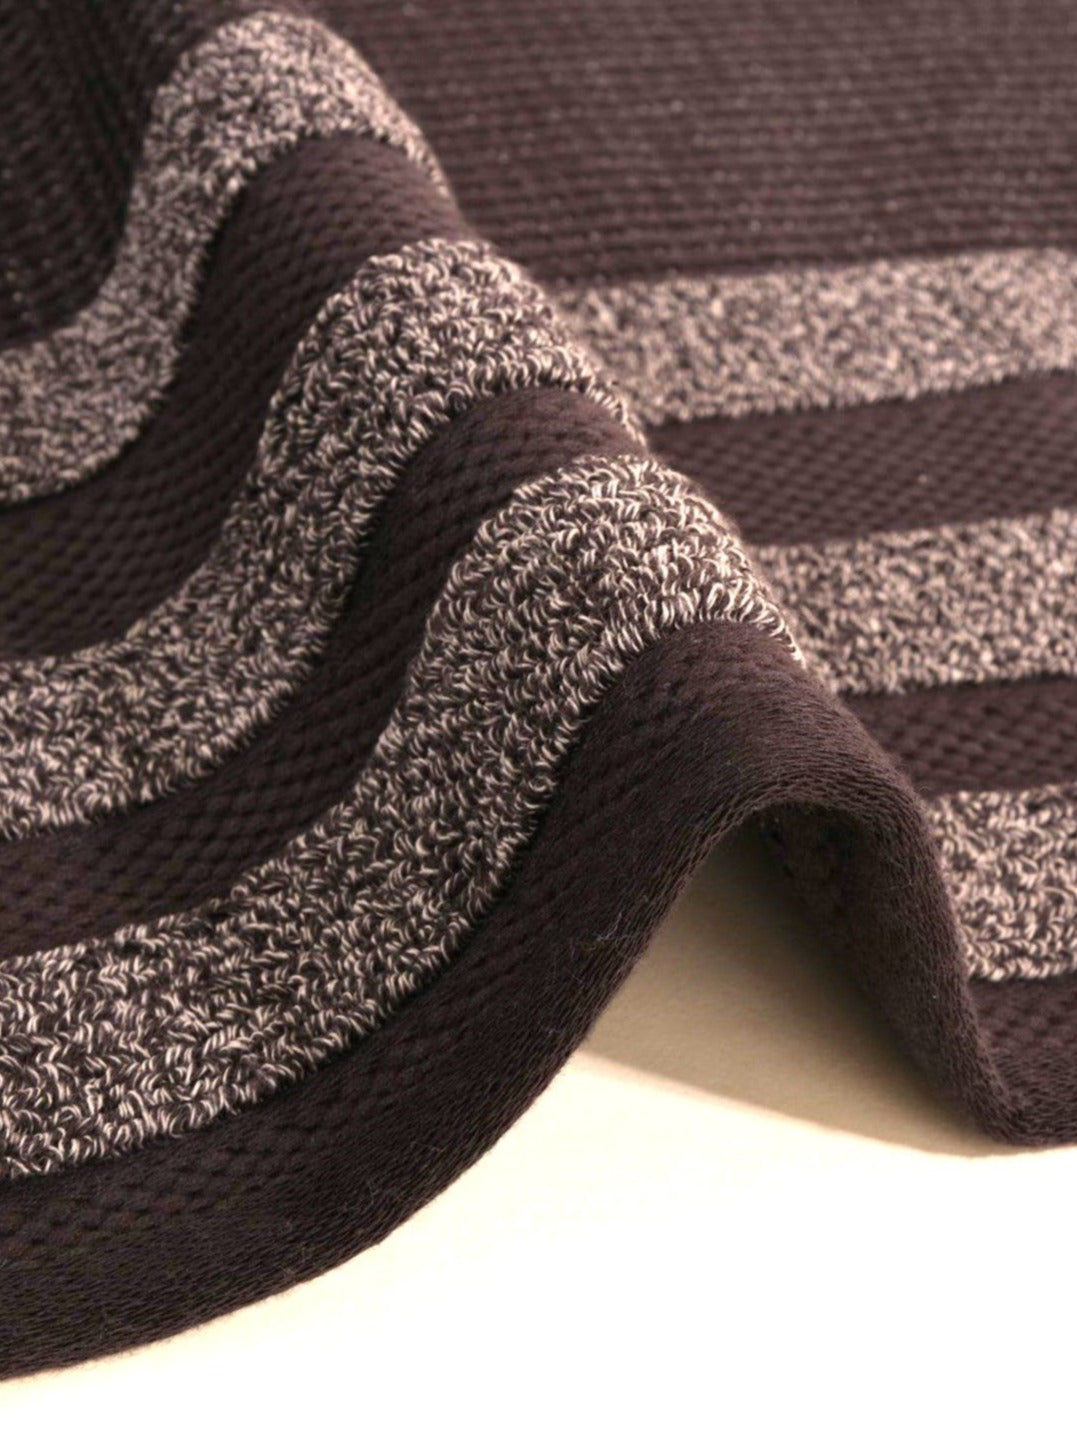 Luxury Turkish Bath towel with special texture; terry cloth and waffle weave on either side, anthracite close up 